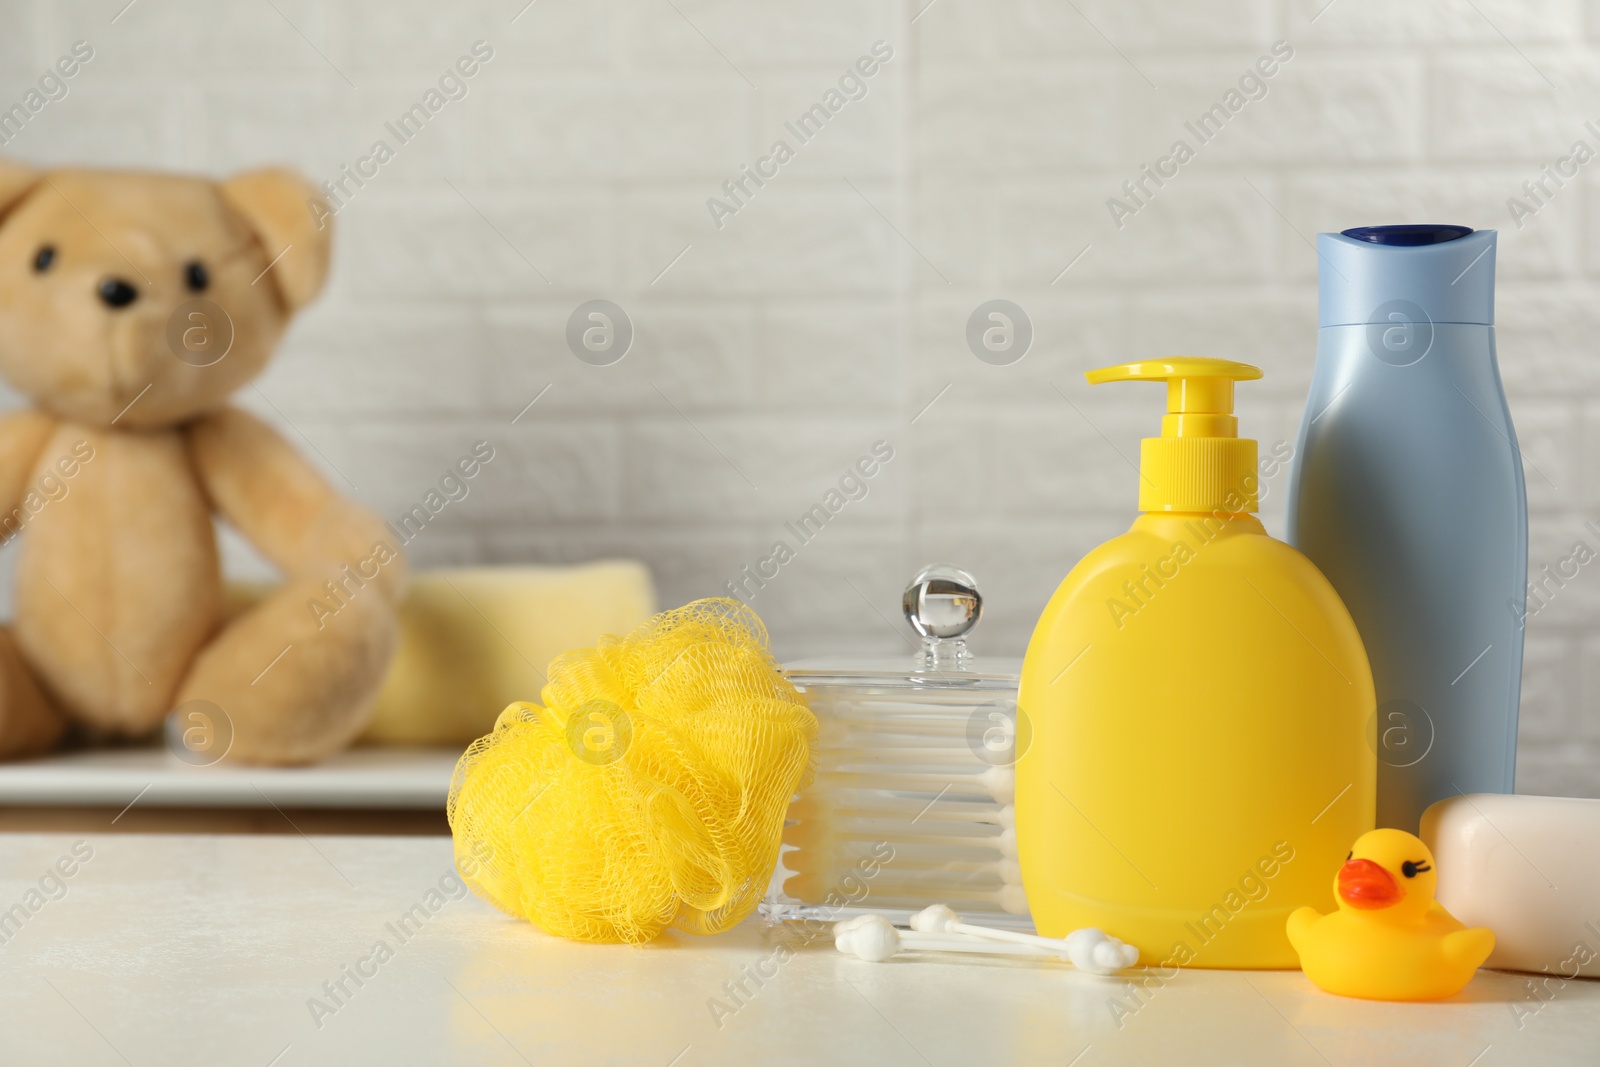 Photo of Baby cosmetic products, bath duck, sponge and cotton swabs on white table against brick wall